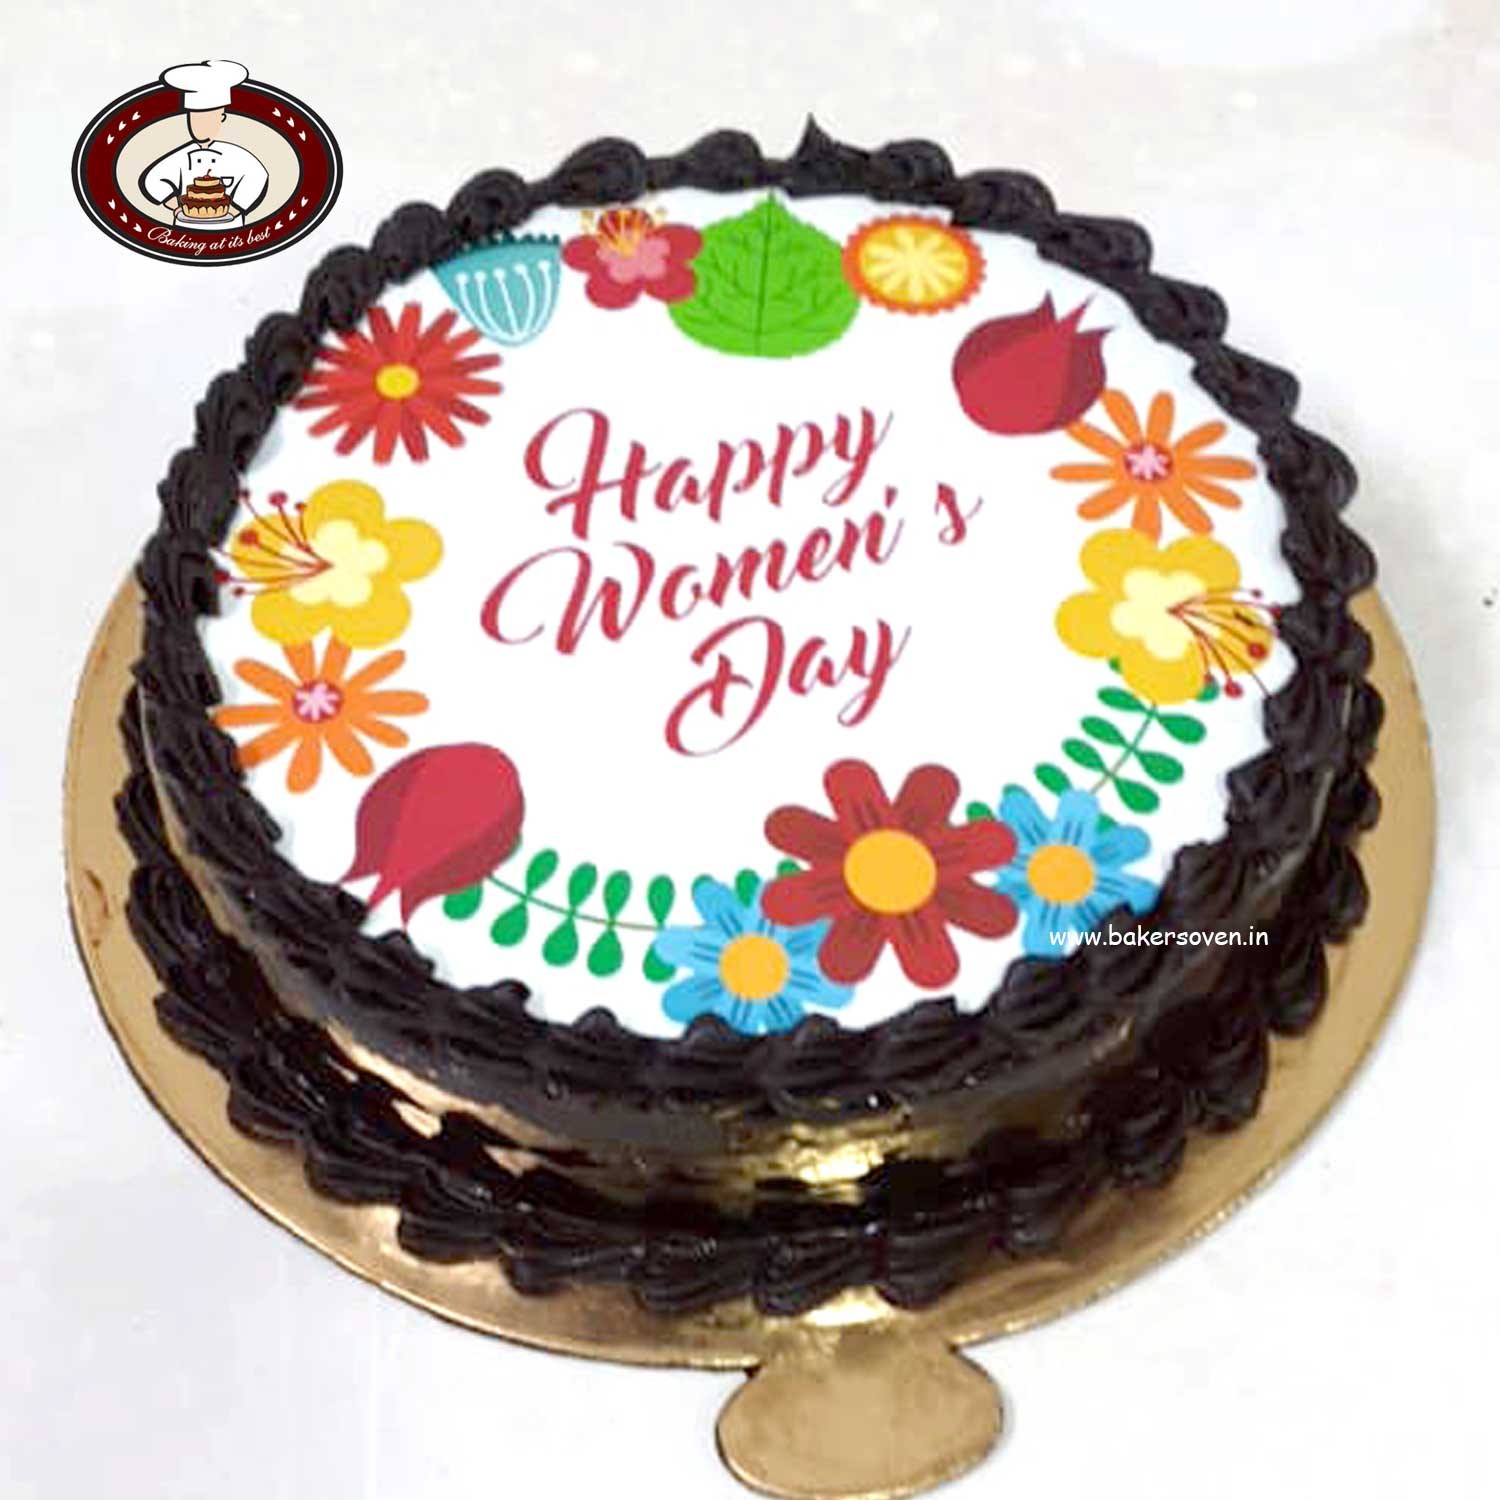 VN Women's Day Cake 11 - Send flowers and cakes to Vietnam